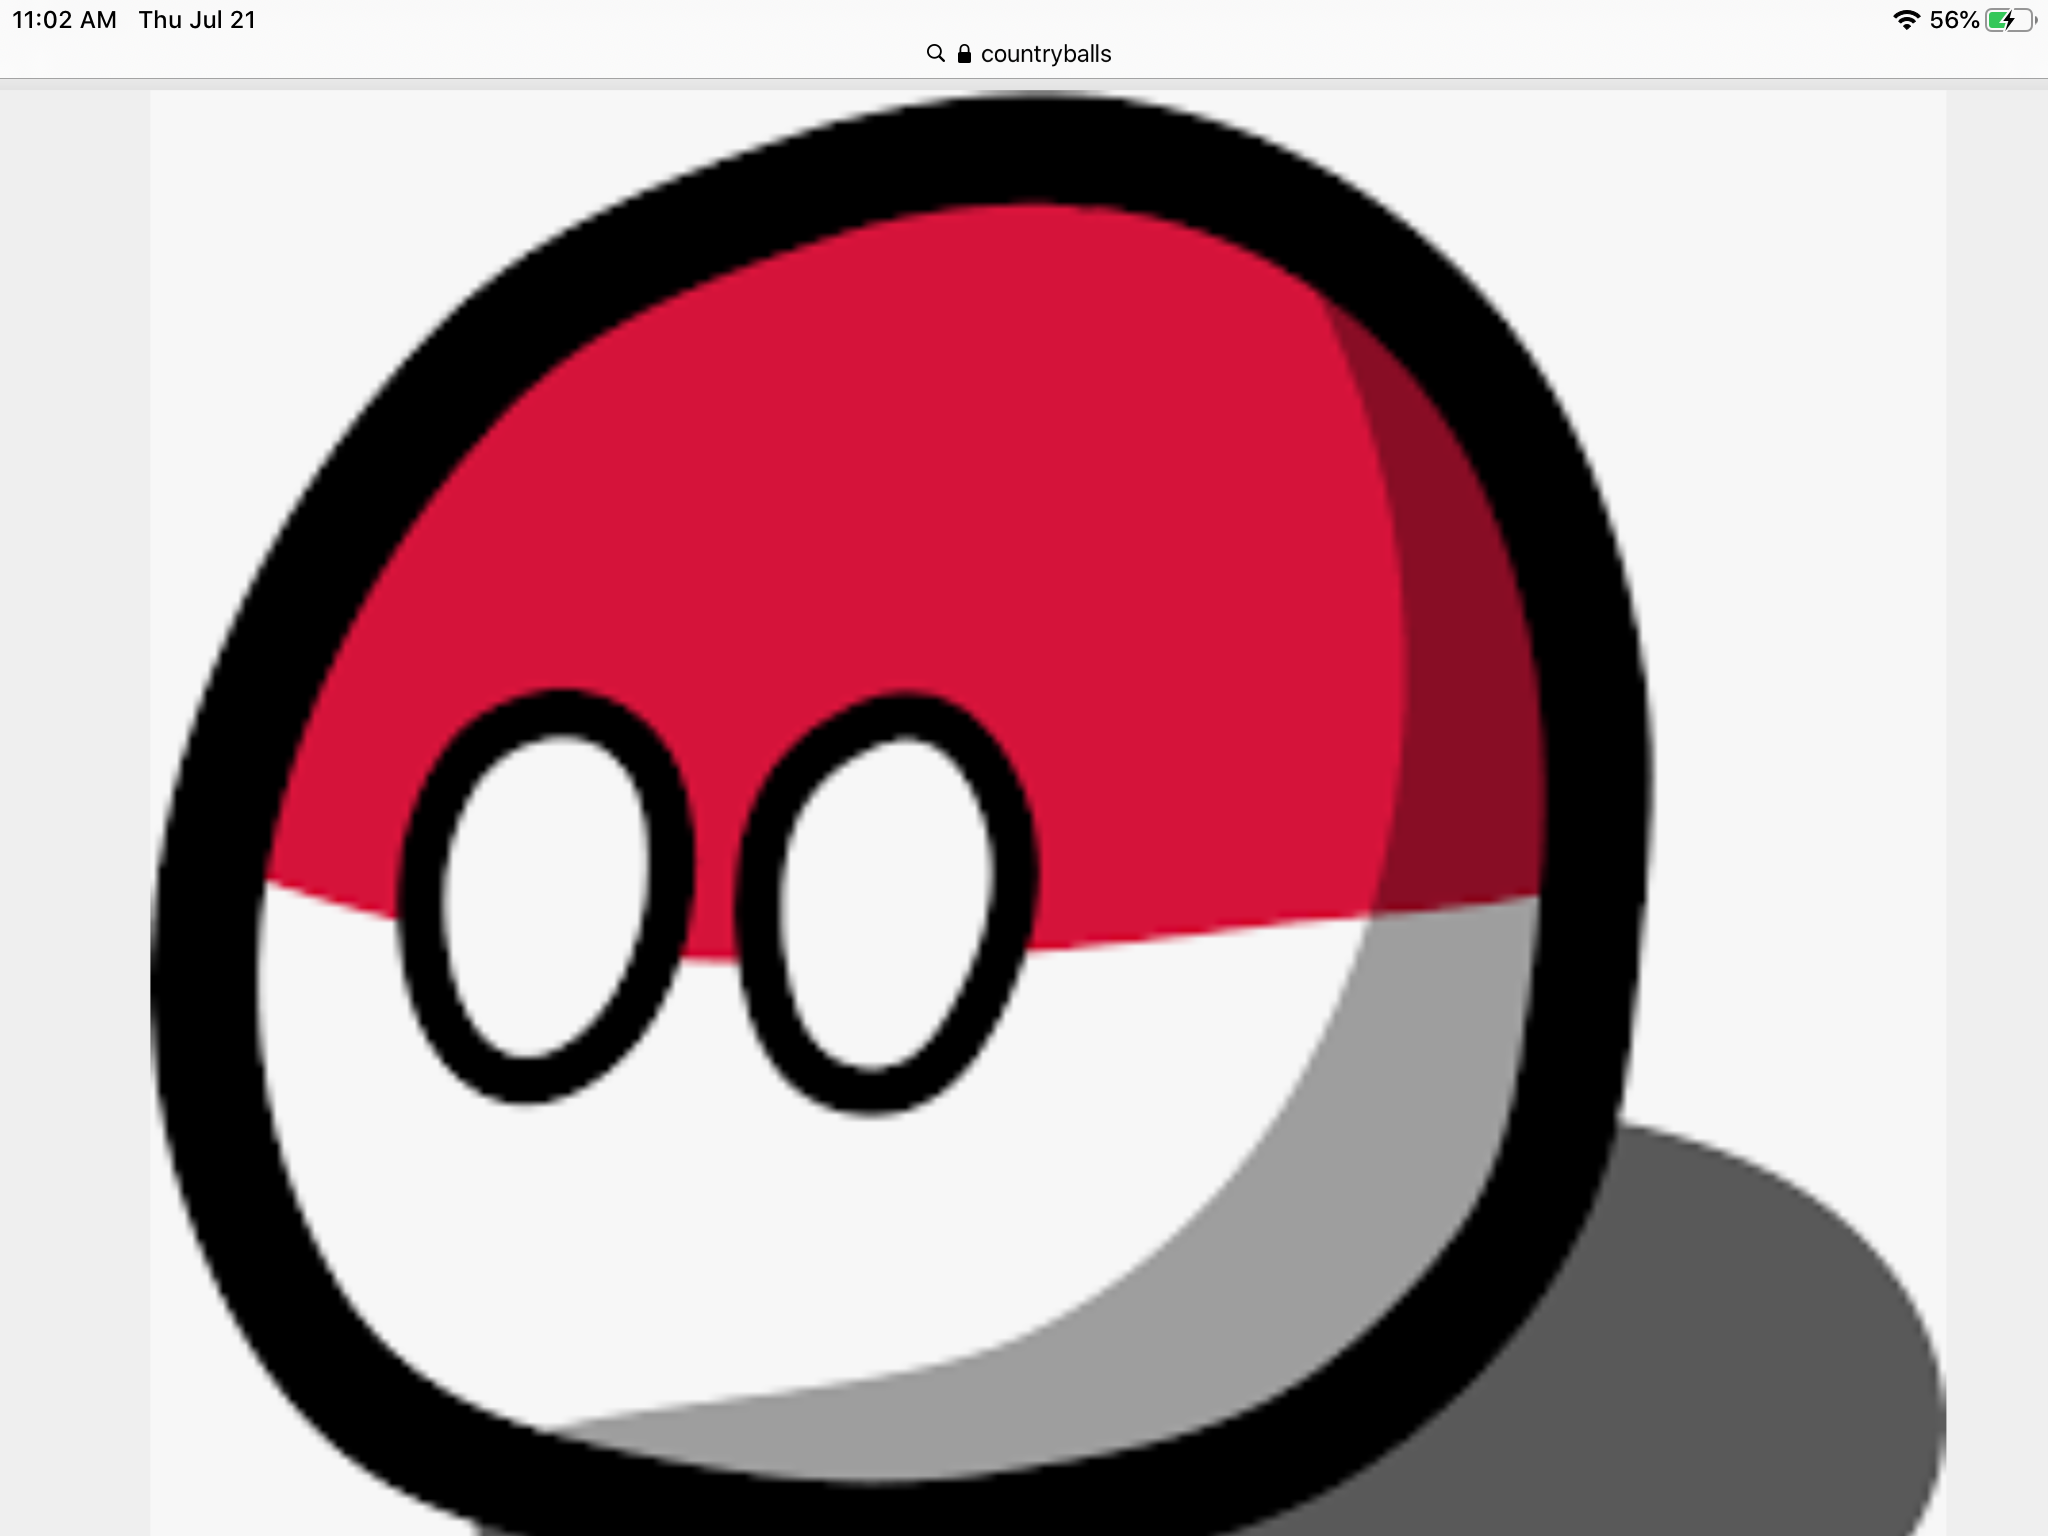 Who is this countryball